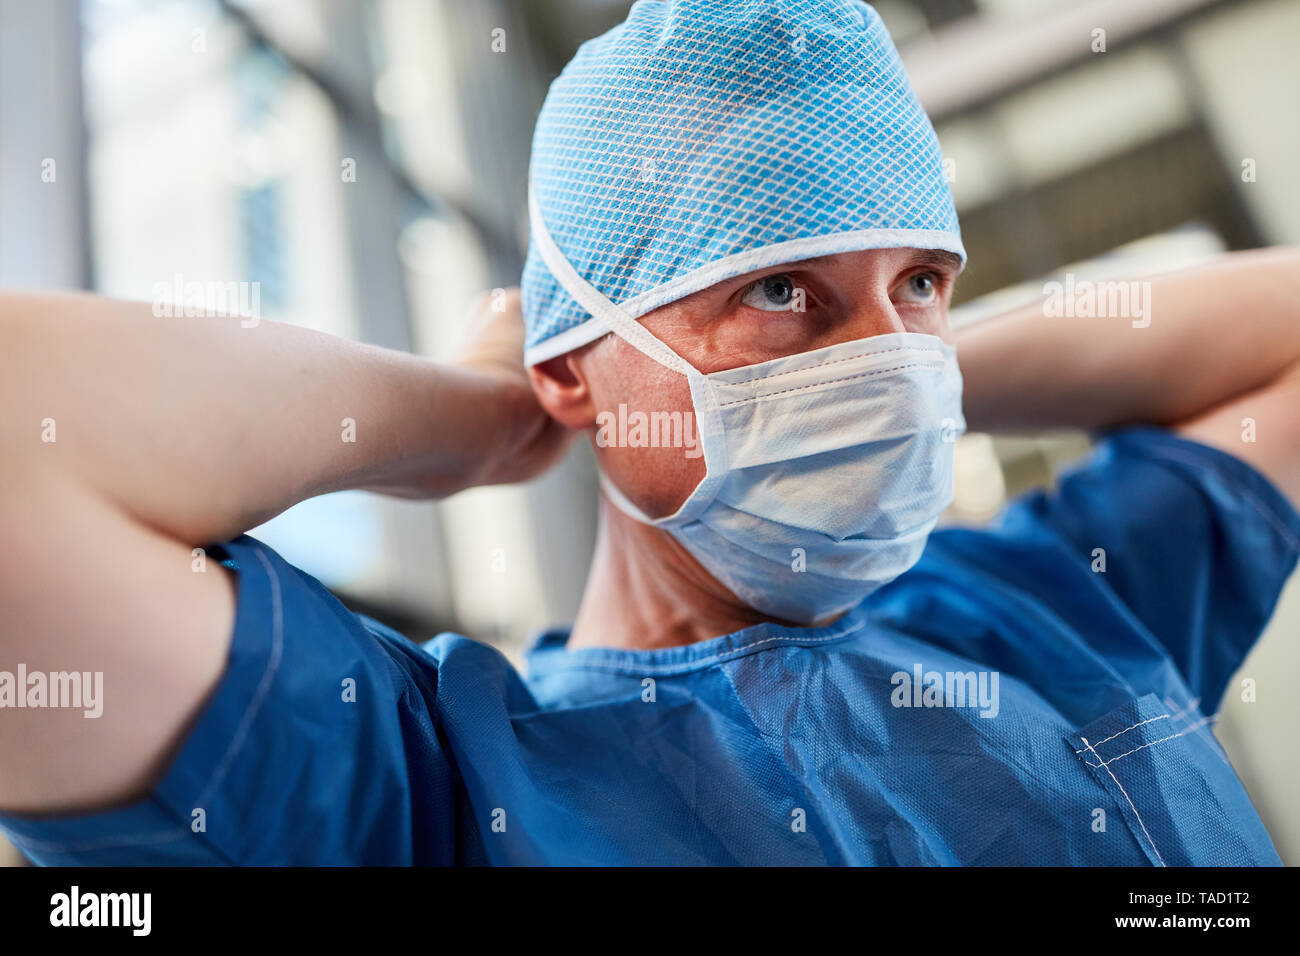 Surgeon in blue surgical gown with surgical mask and hood prepared for emergency service Stock Photo